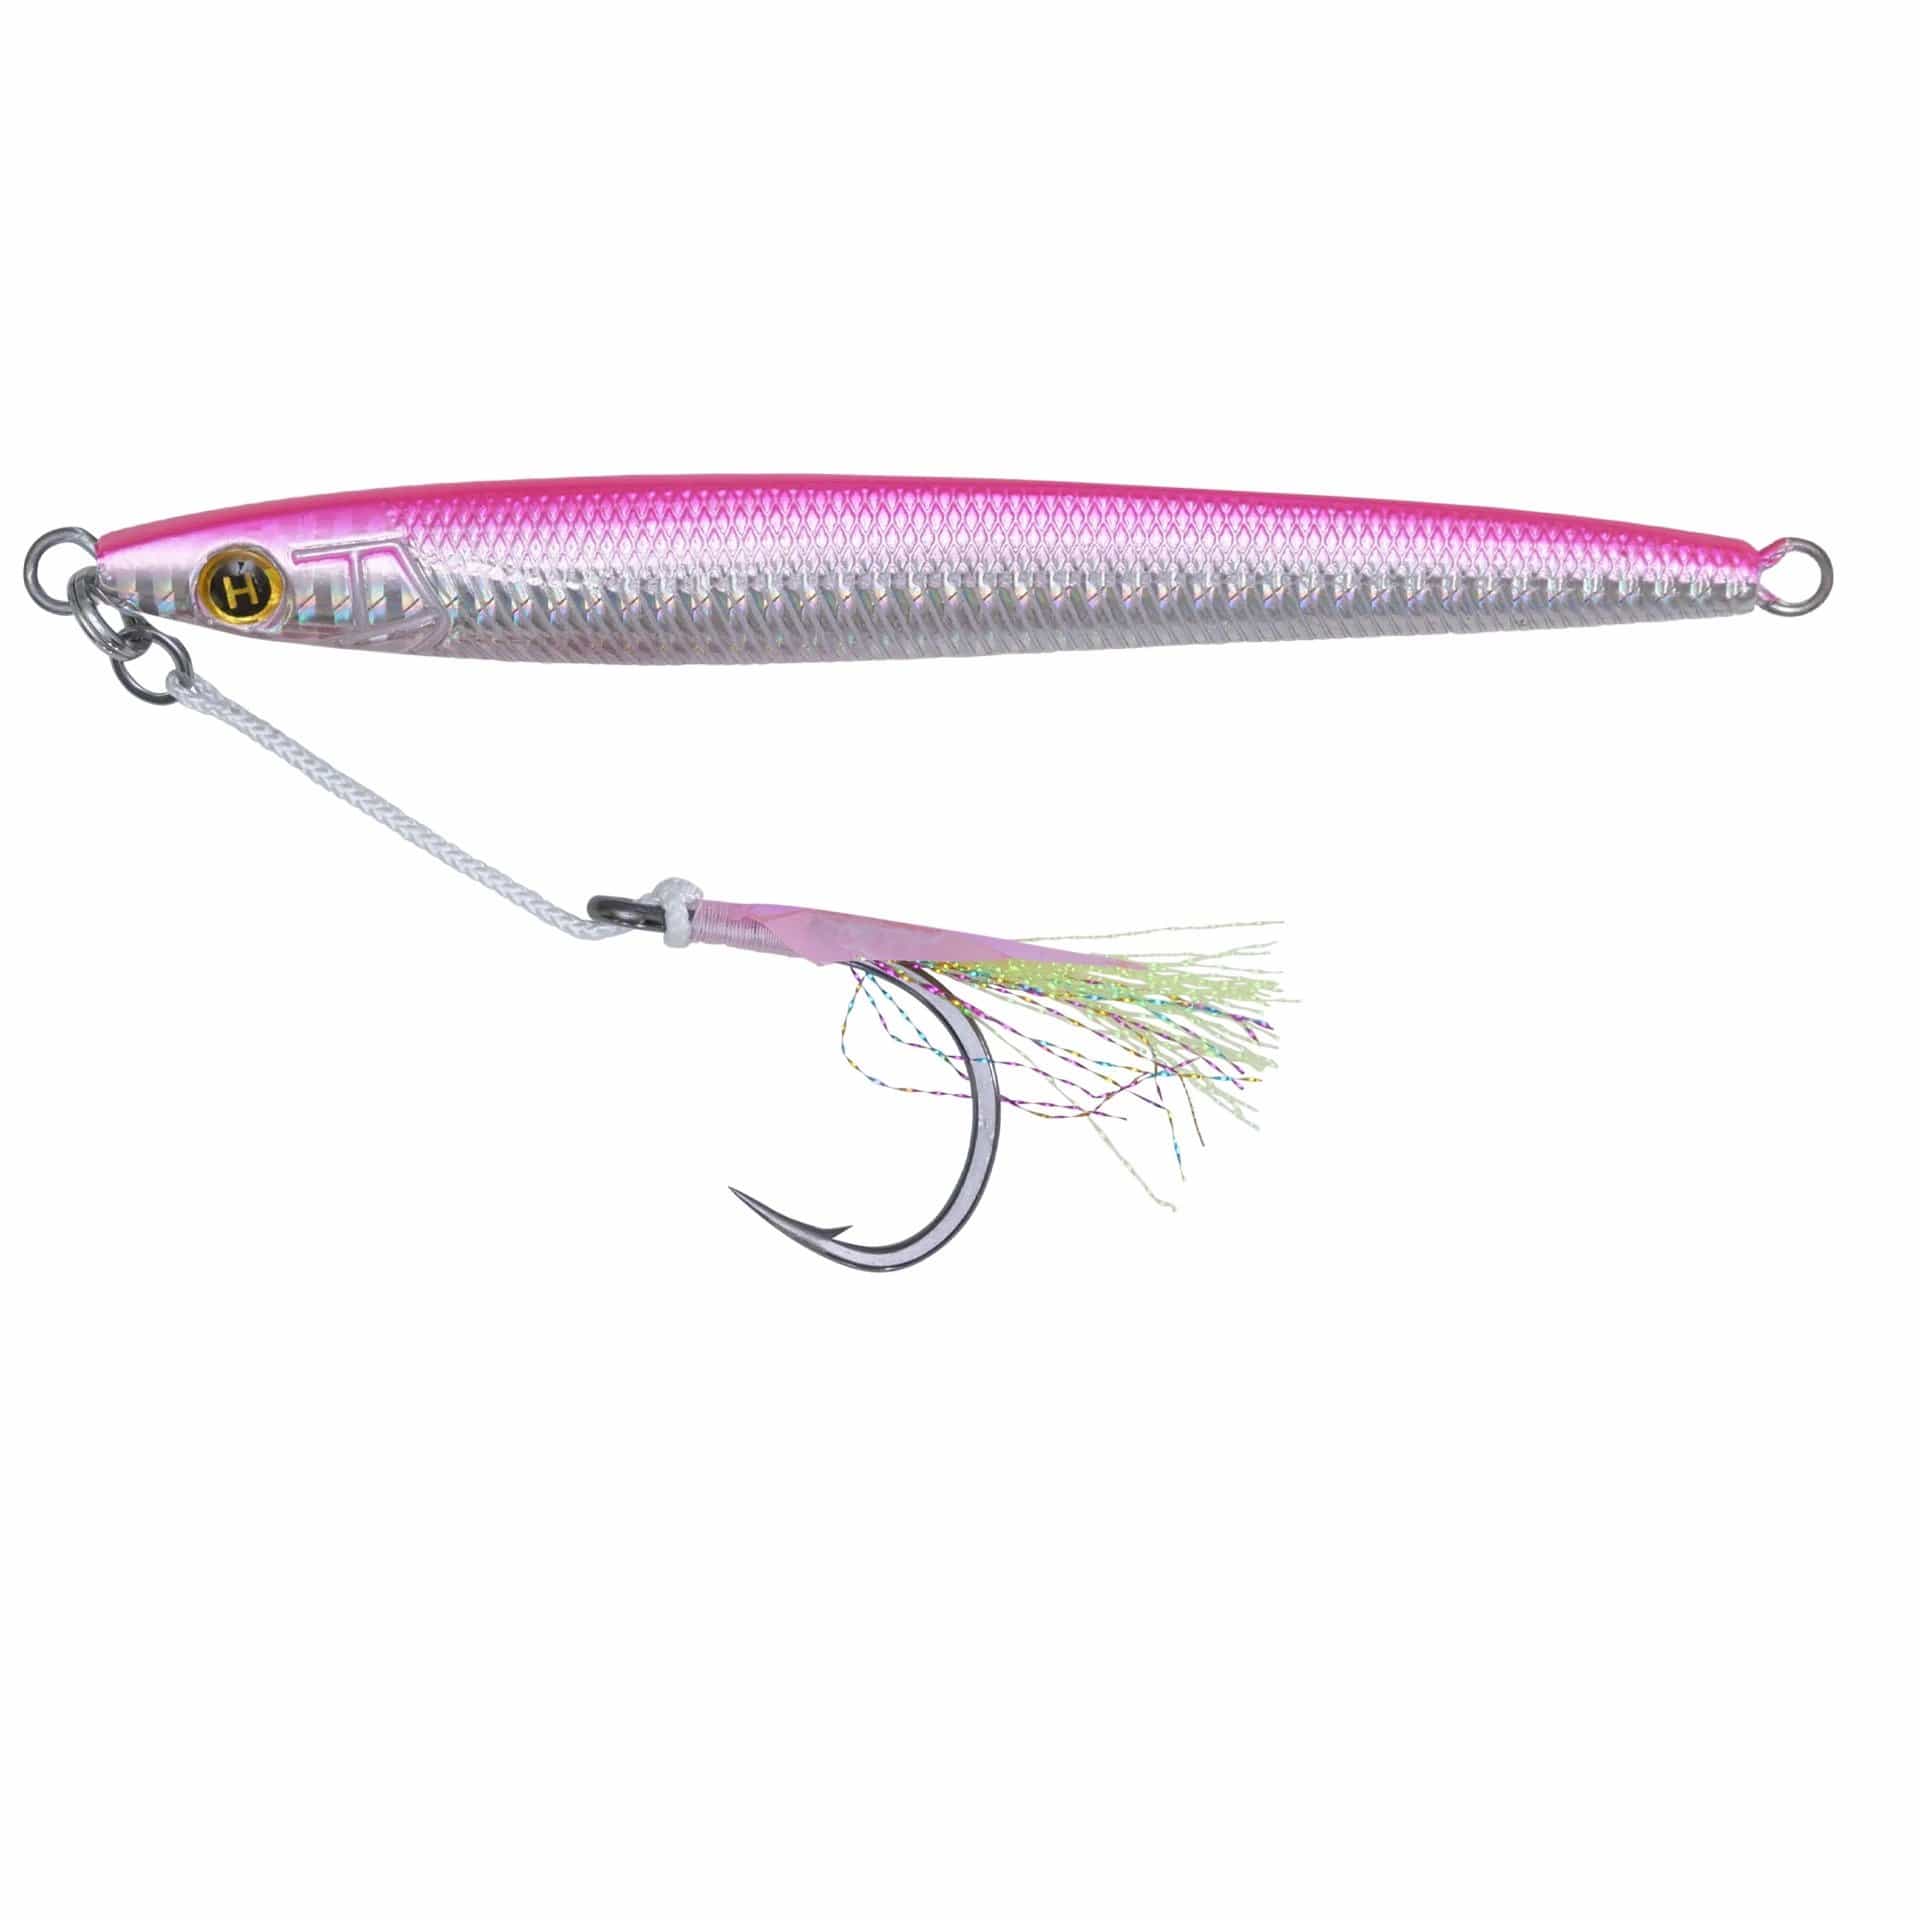 Offshore Lures and Bars - The Saltwater Edge